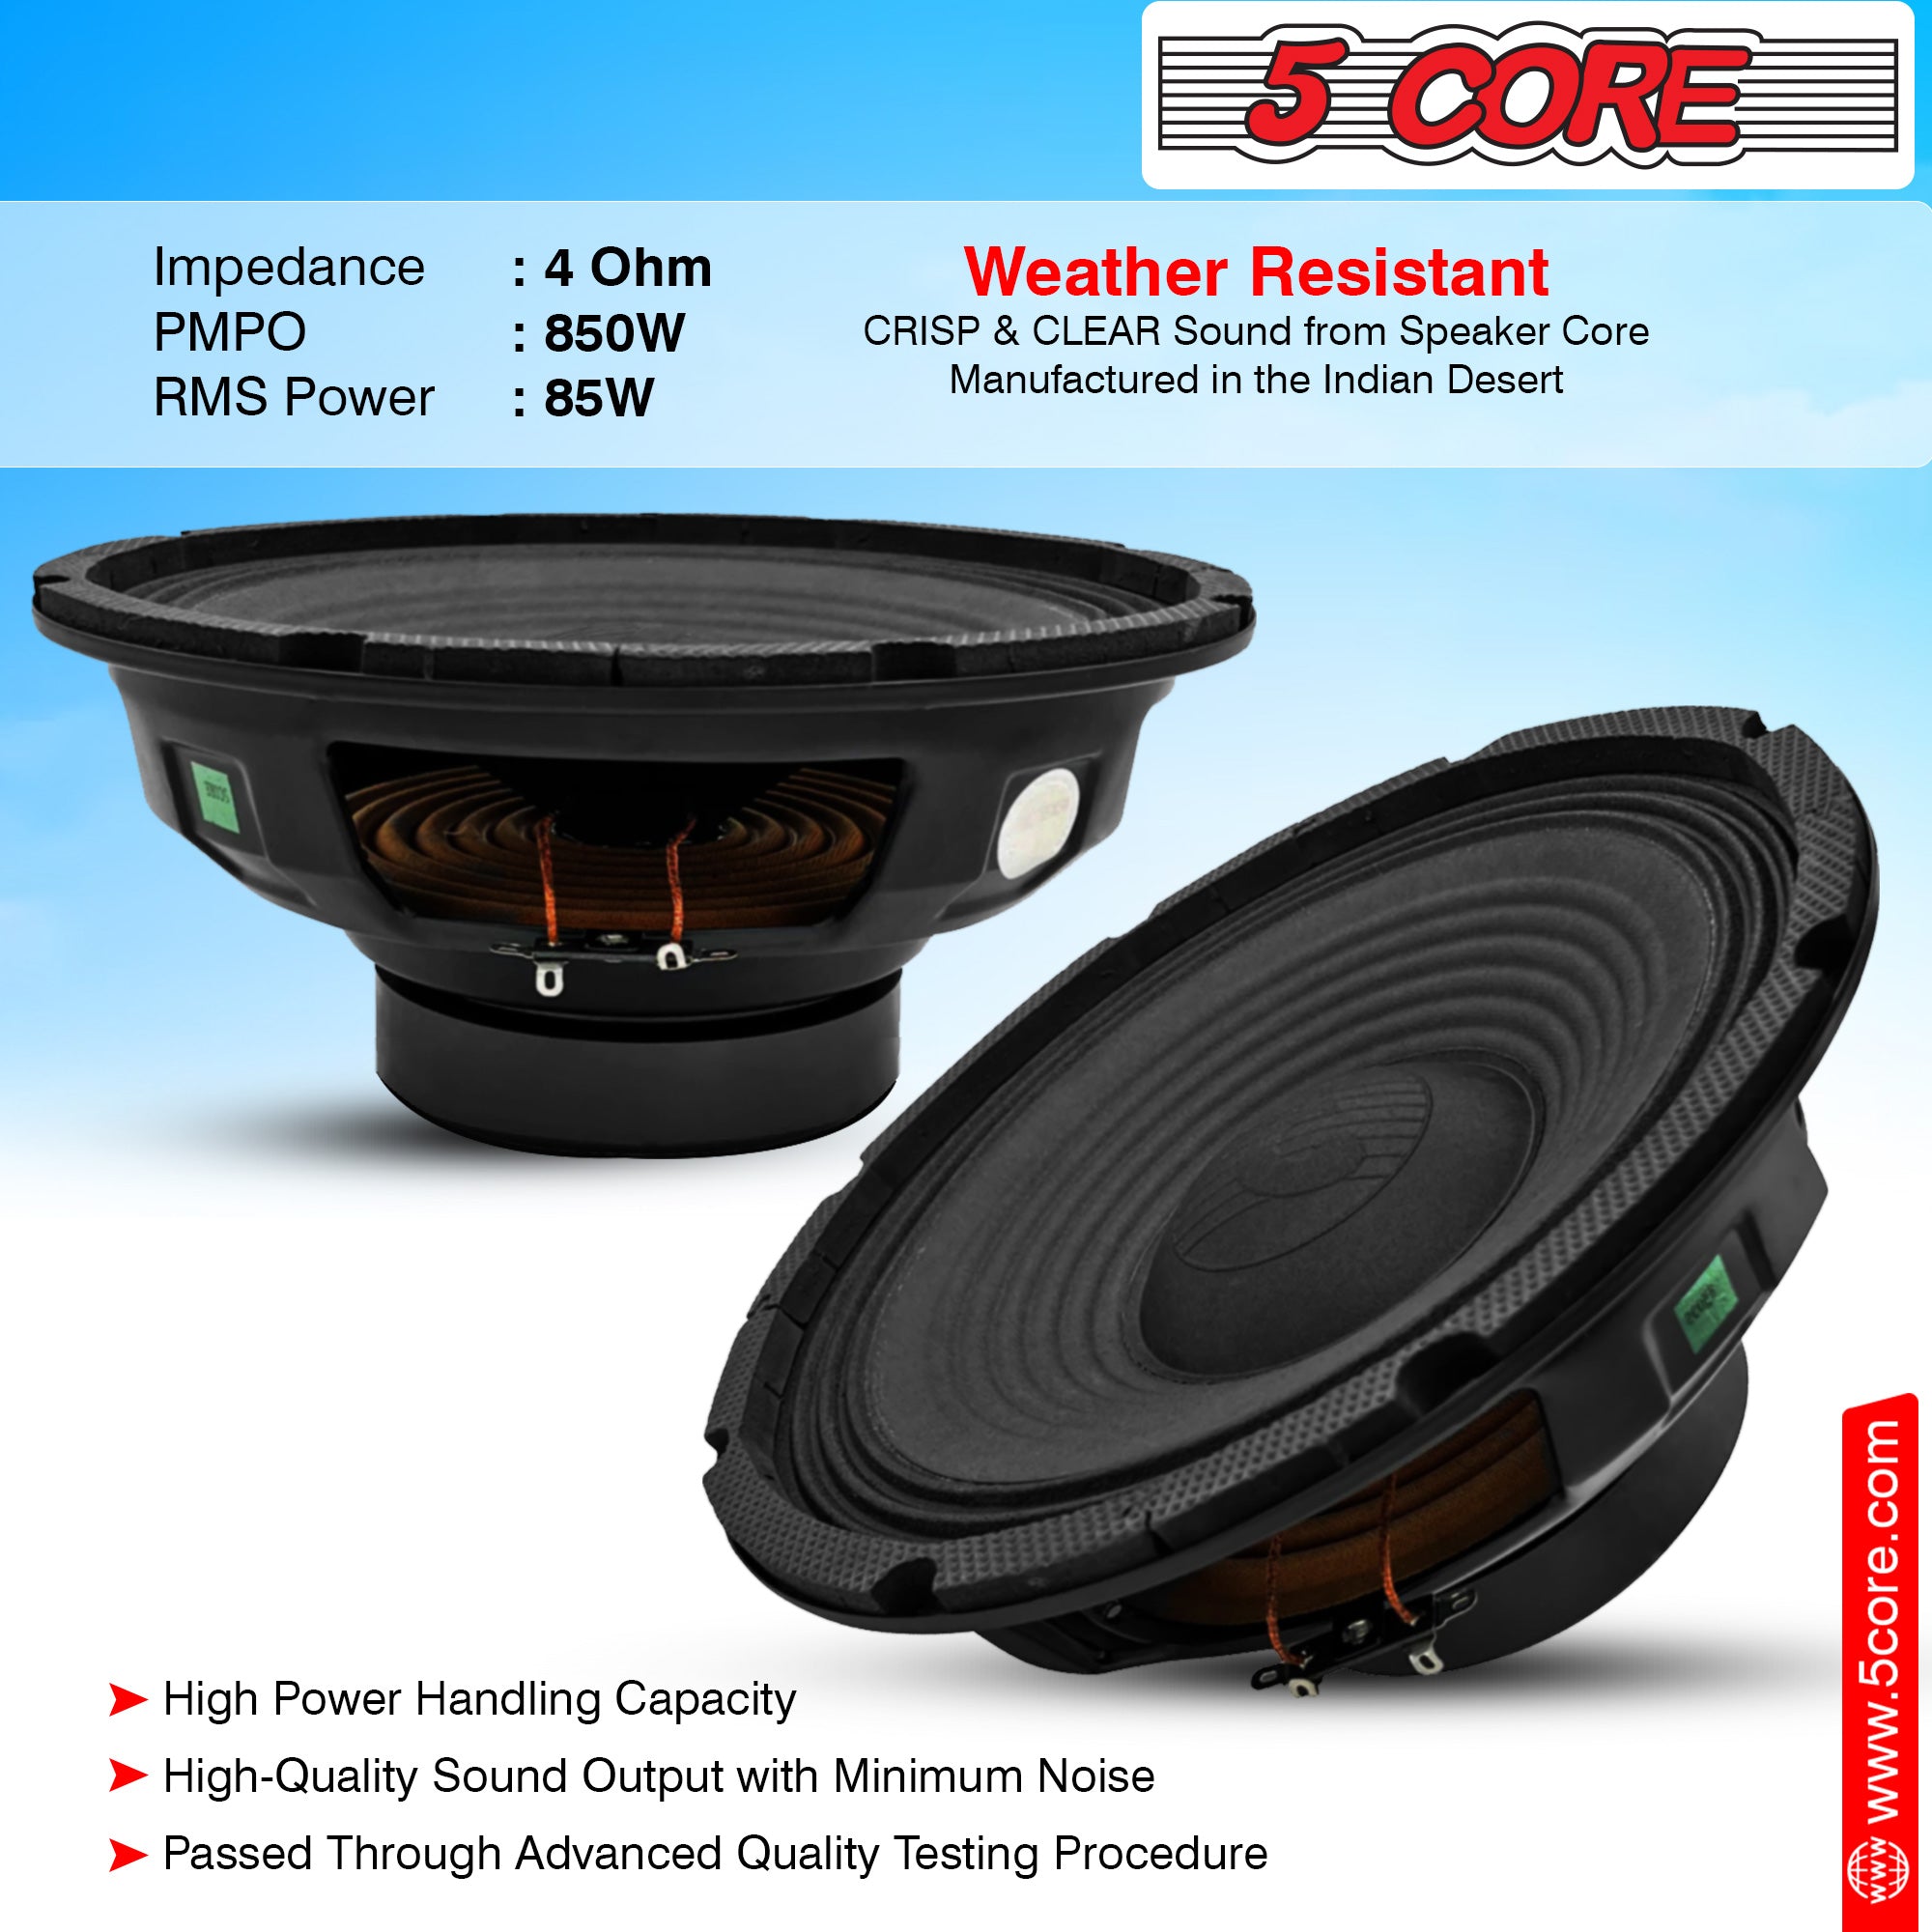 5 core 10 inch subwoofer weather resistant.